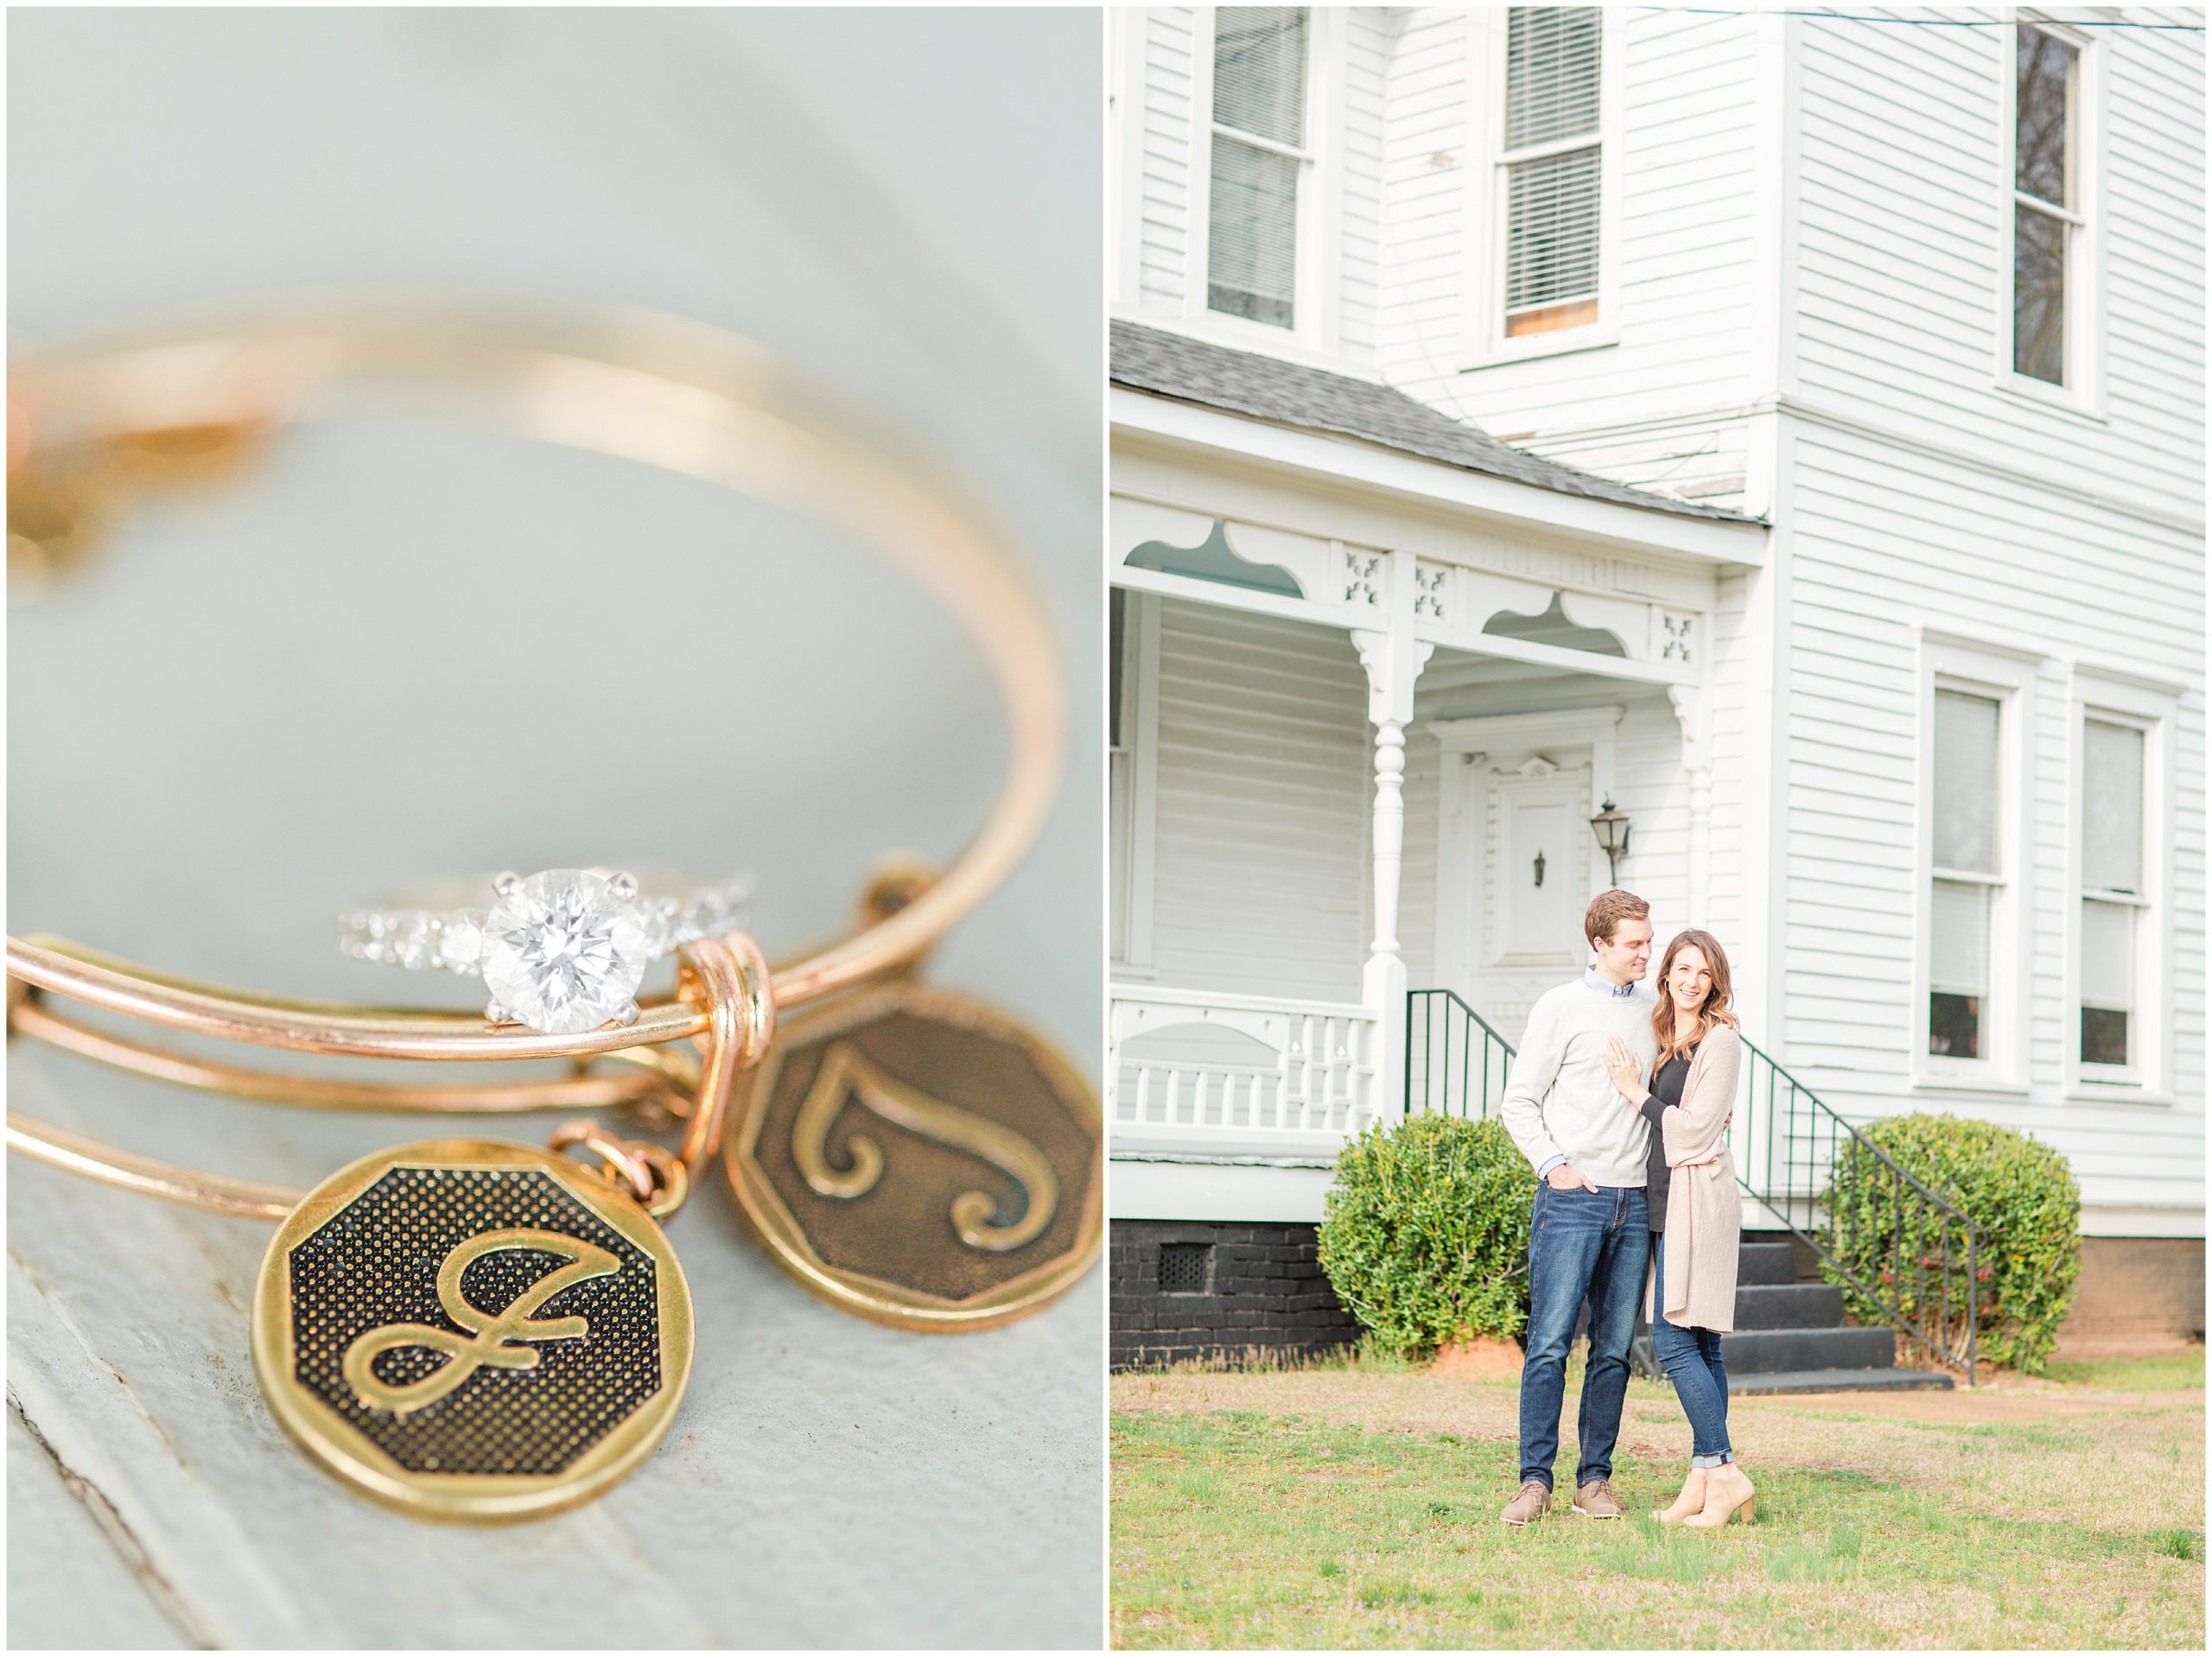 Lawrenceville Anniversary Session for married couple